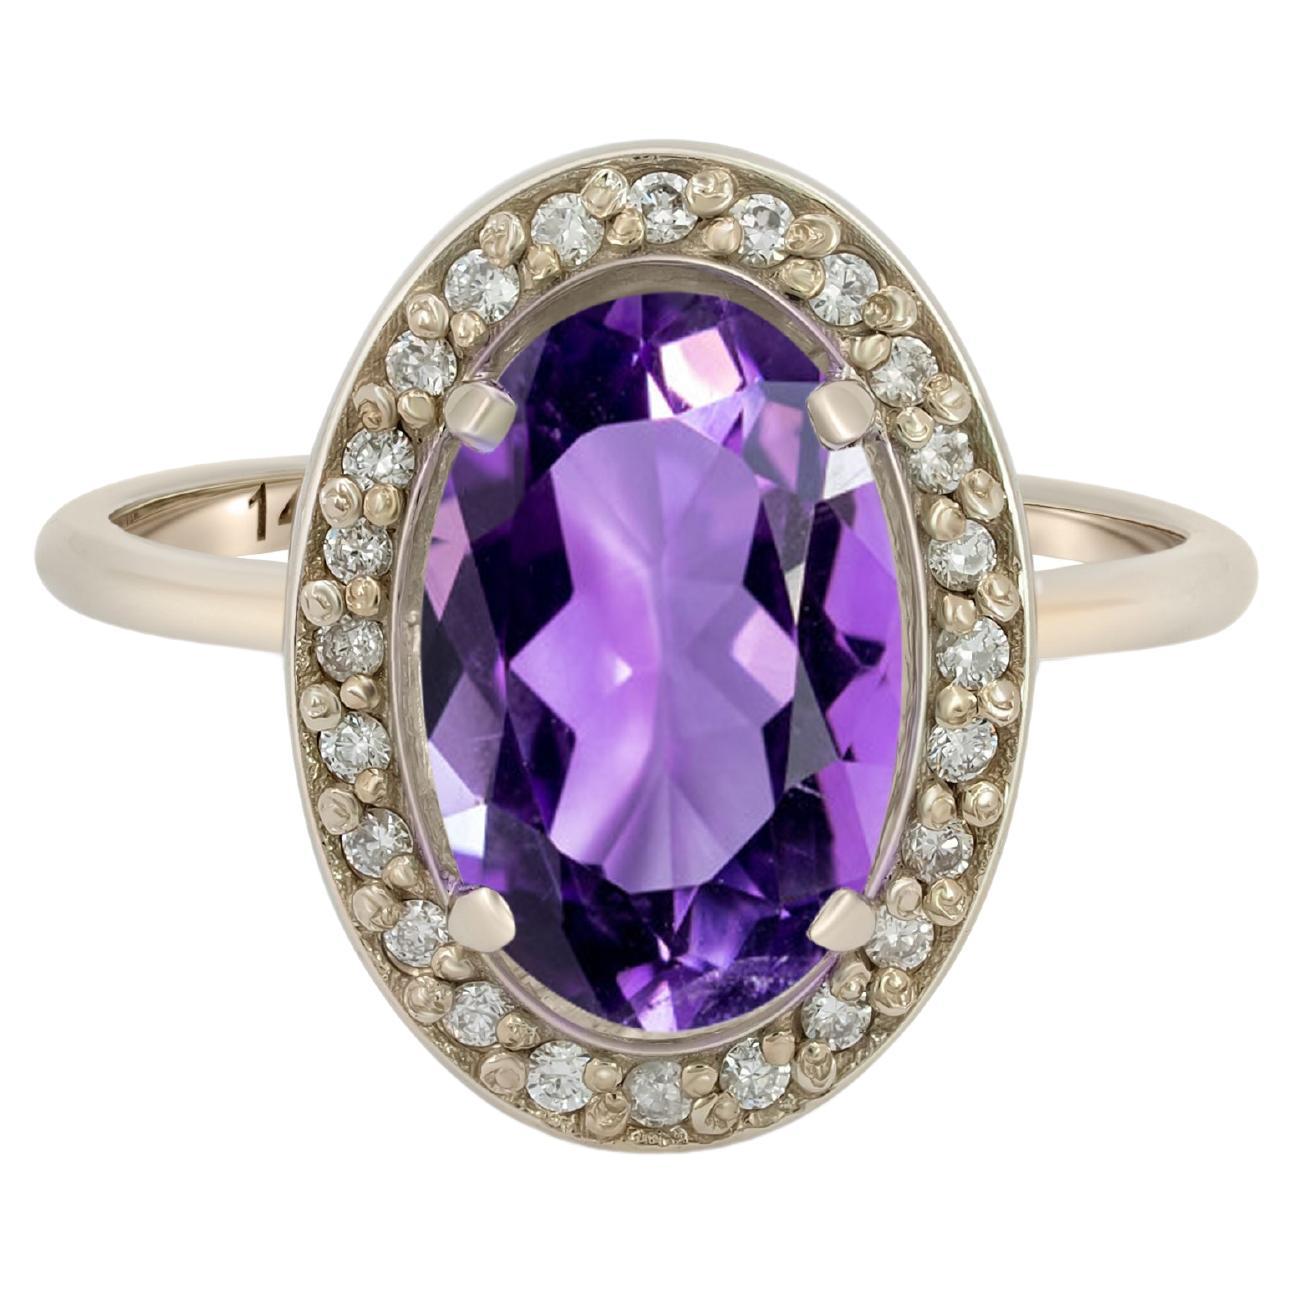 For Sale:  Amethyst and diamonds 14k gold ring.